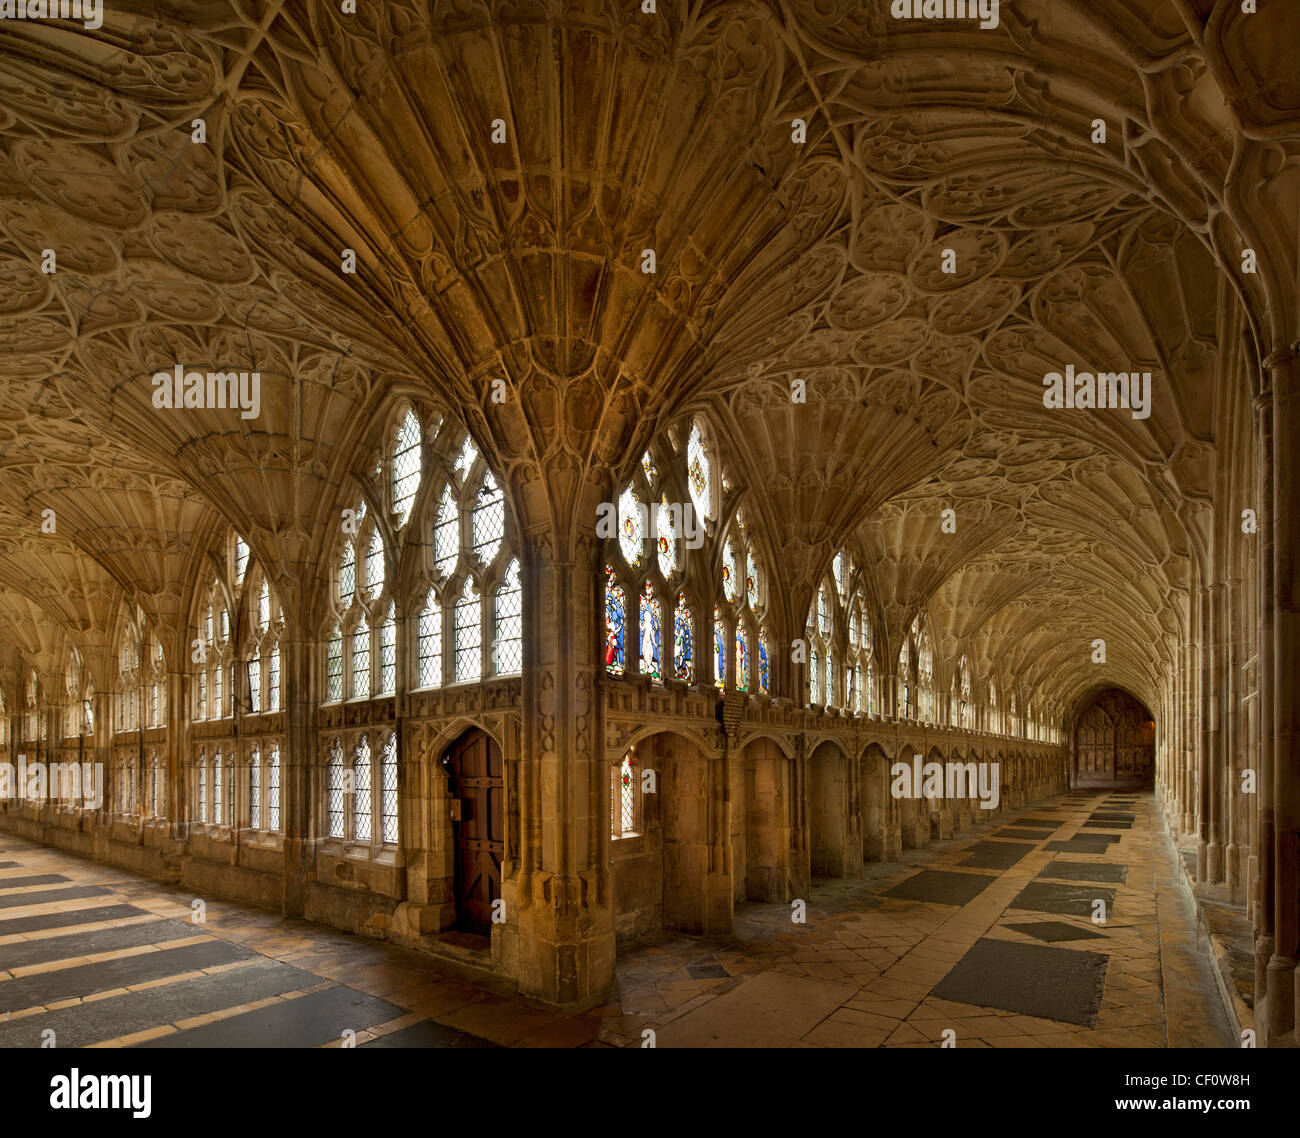 interior of cloisters at Gloucester cathedral where harry Potter films were made, Gloucestershire, England Stock Photo